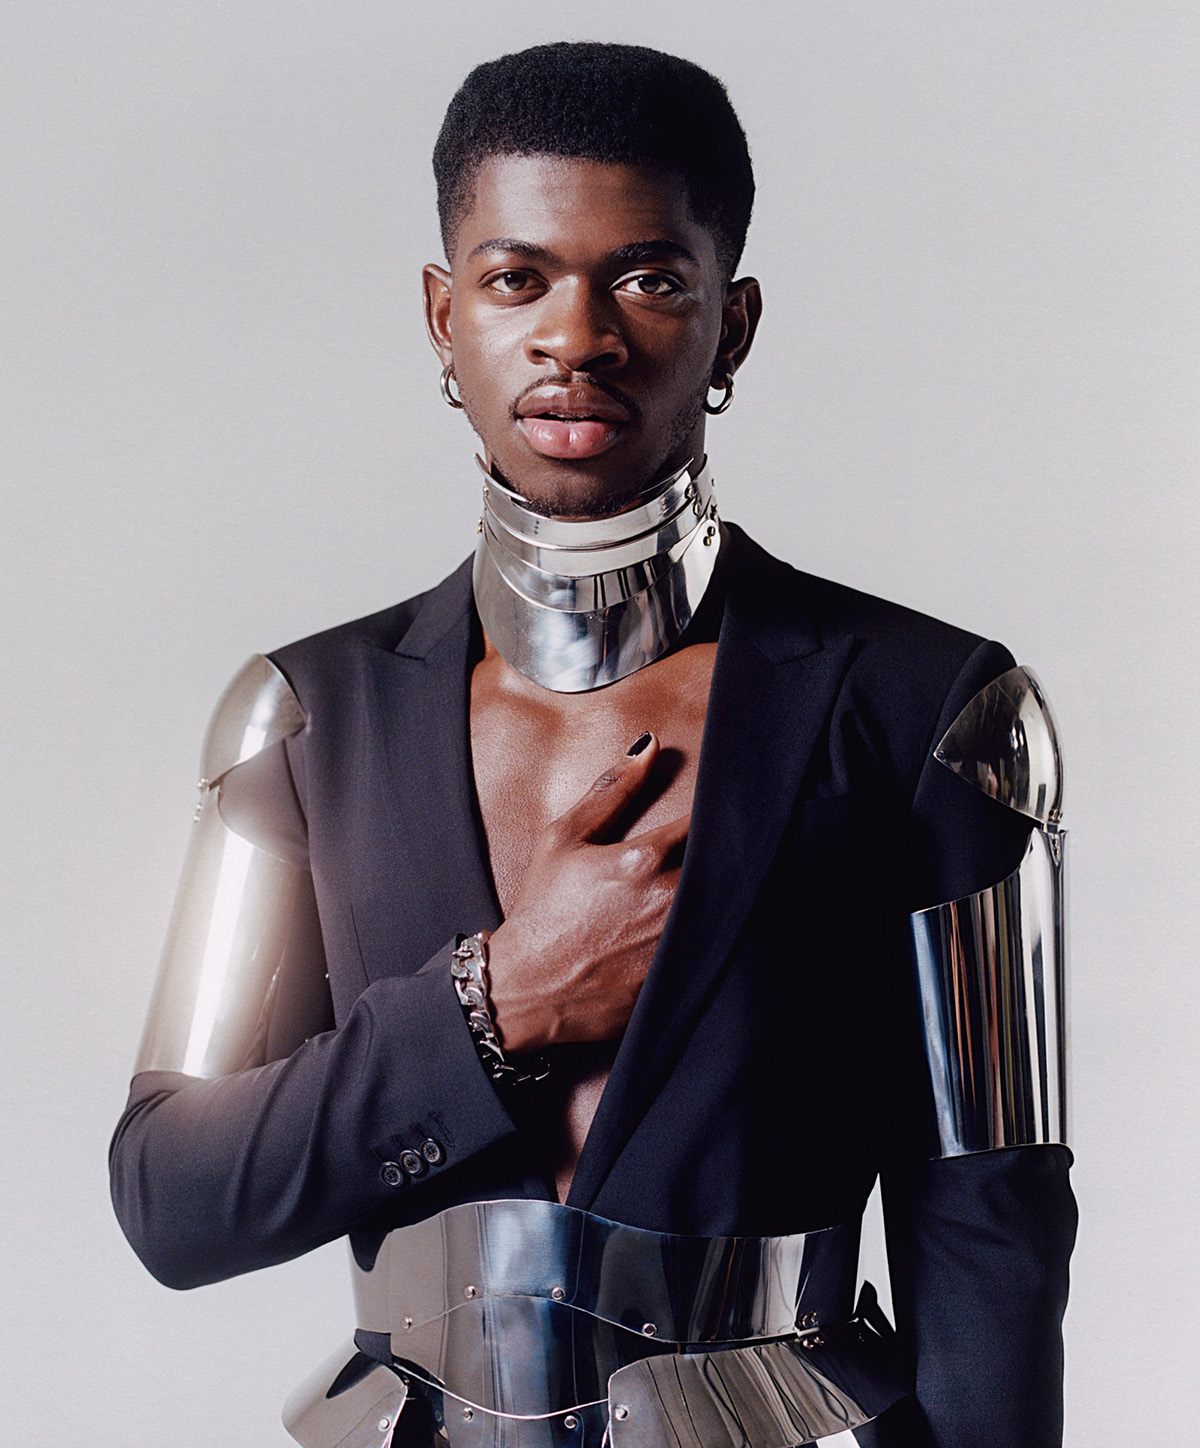 Lil Nas X covers British GQ Style Summer 2021 by Luke Gilford